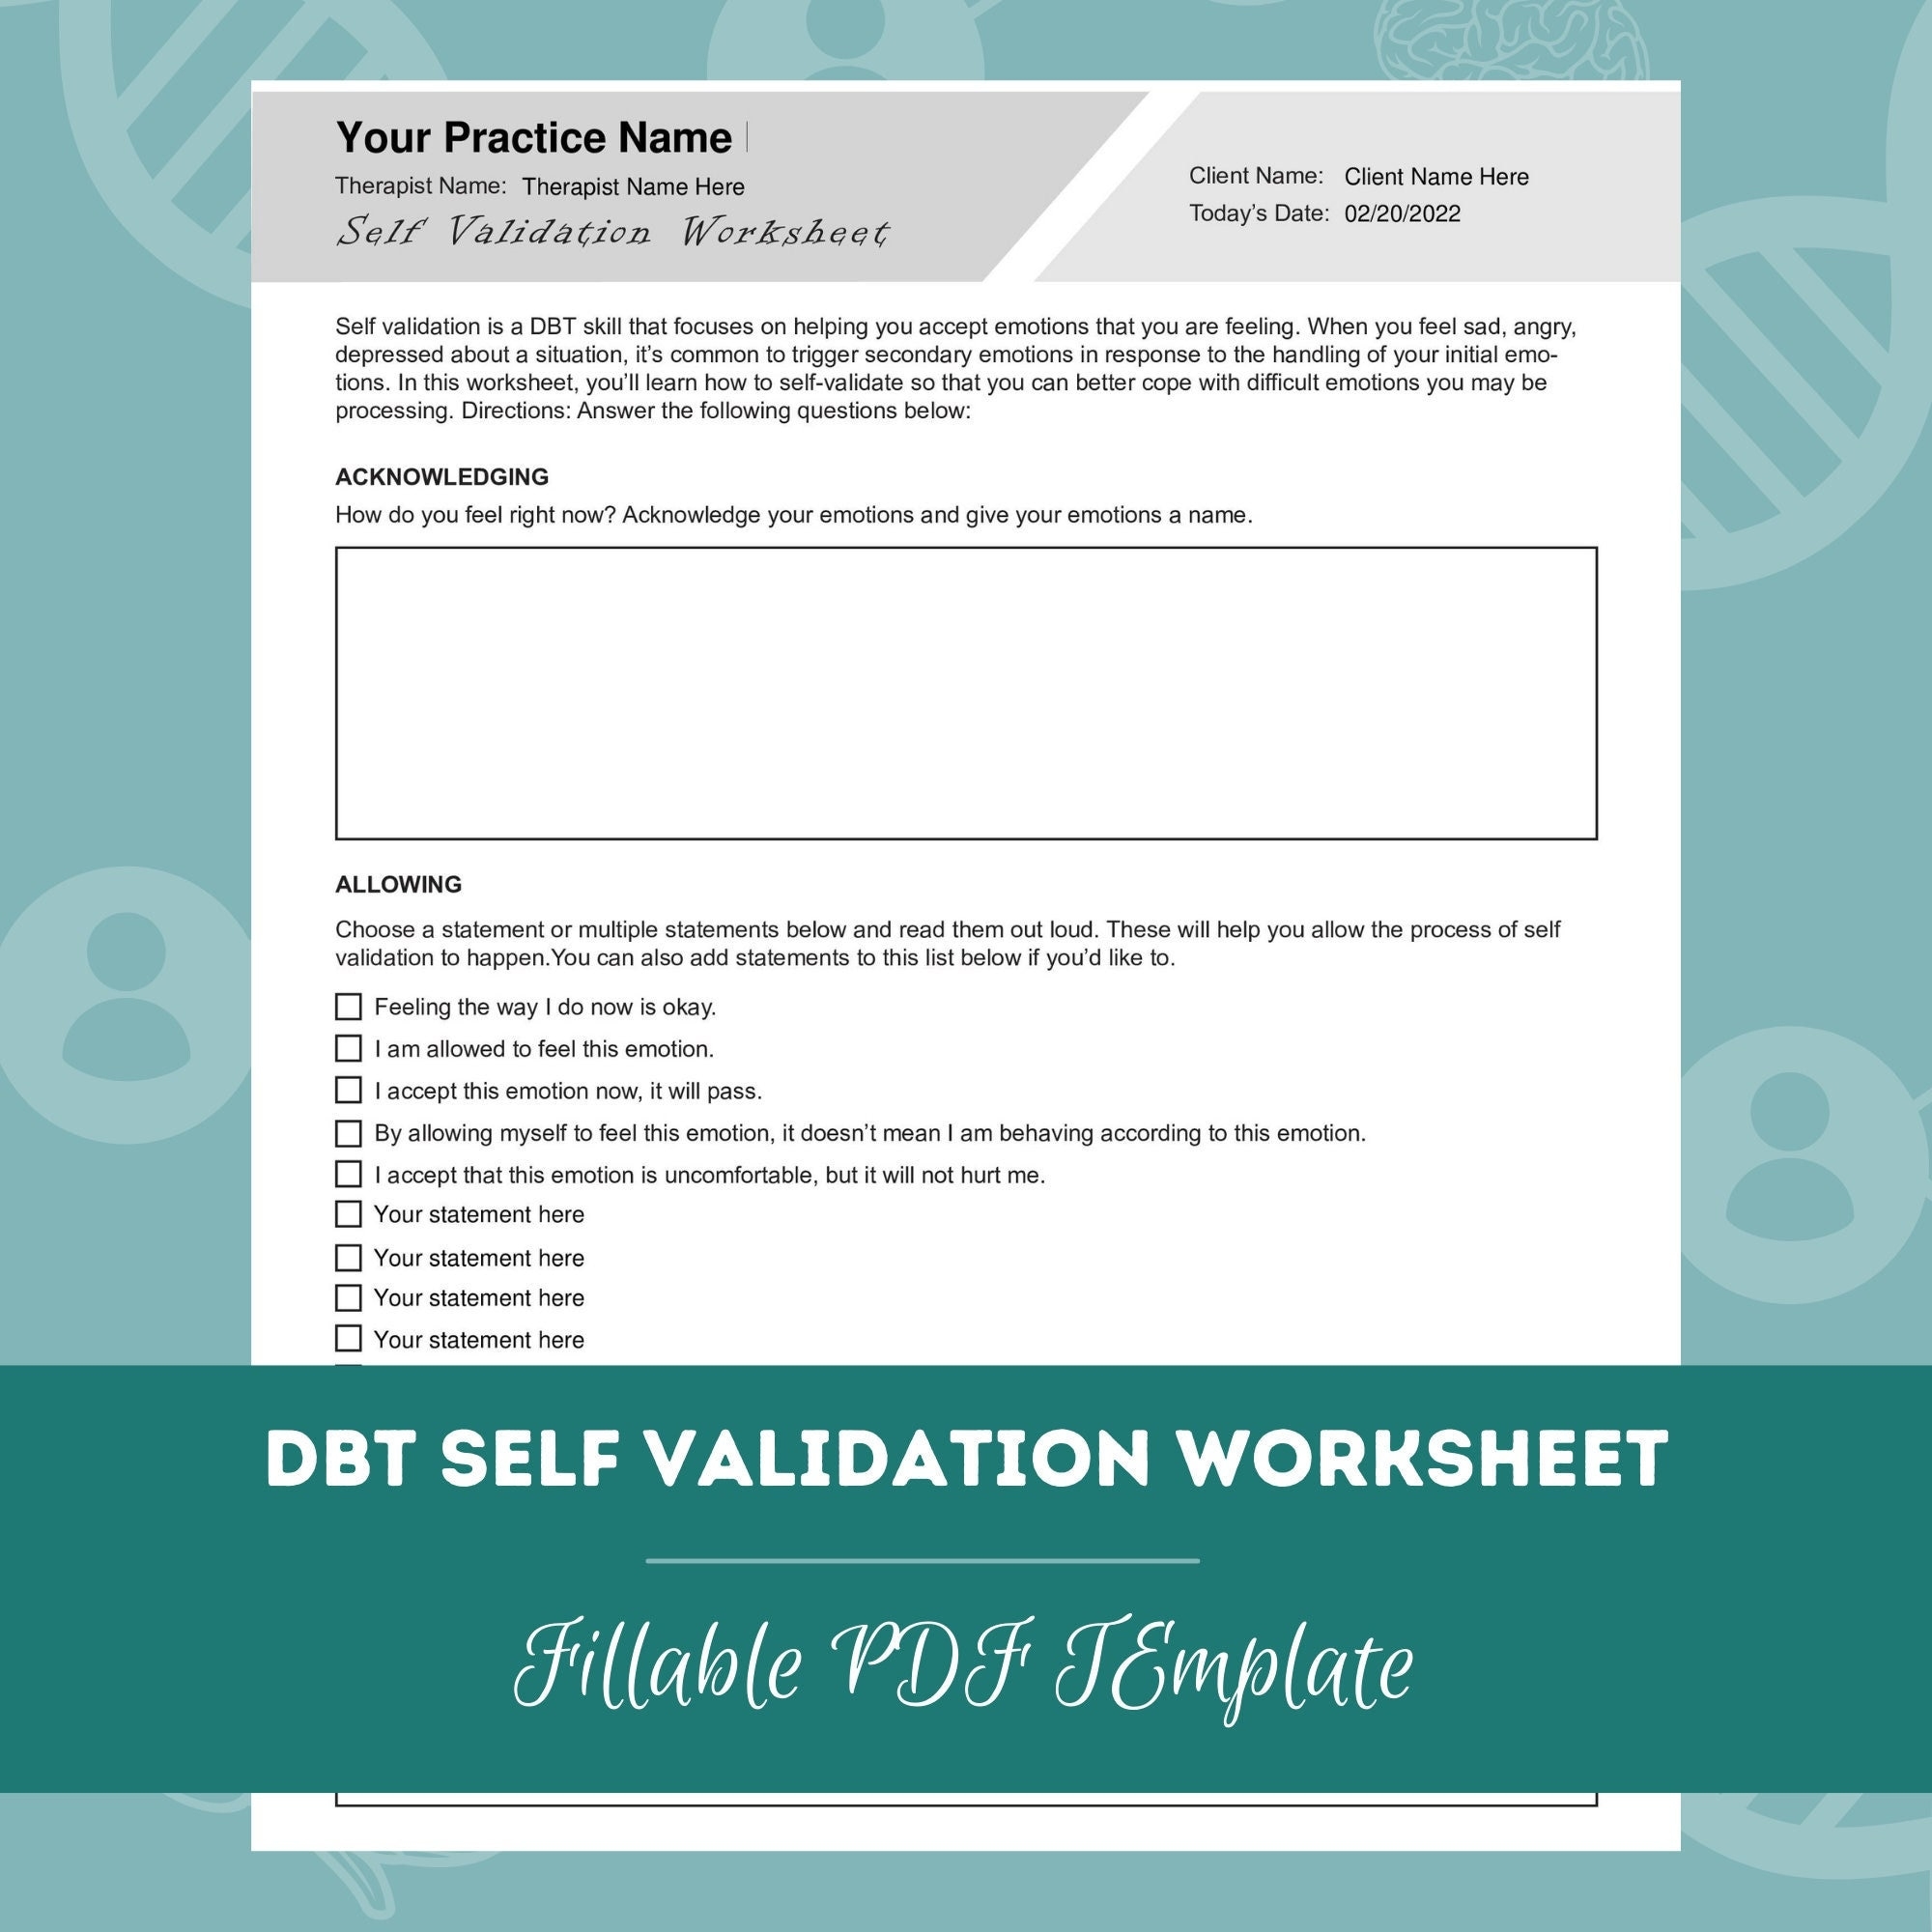 DBT Self Validation Worksheet Editable Fillable PDF Template For Counselors Psychologists Social Workers Therapists Etsy